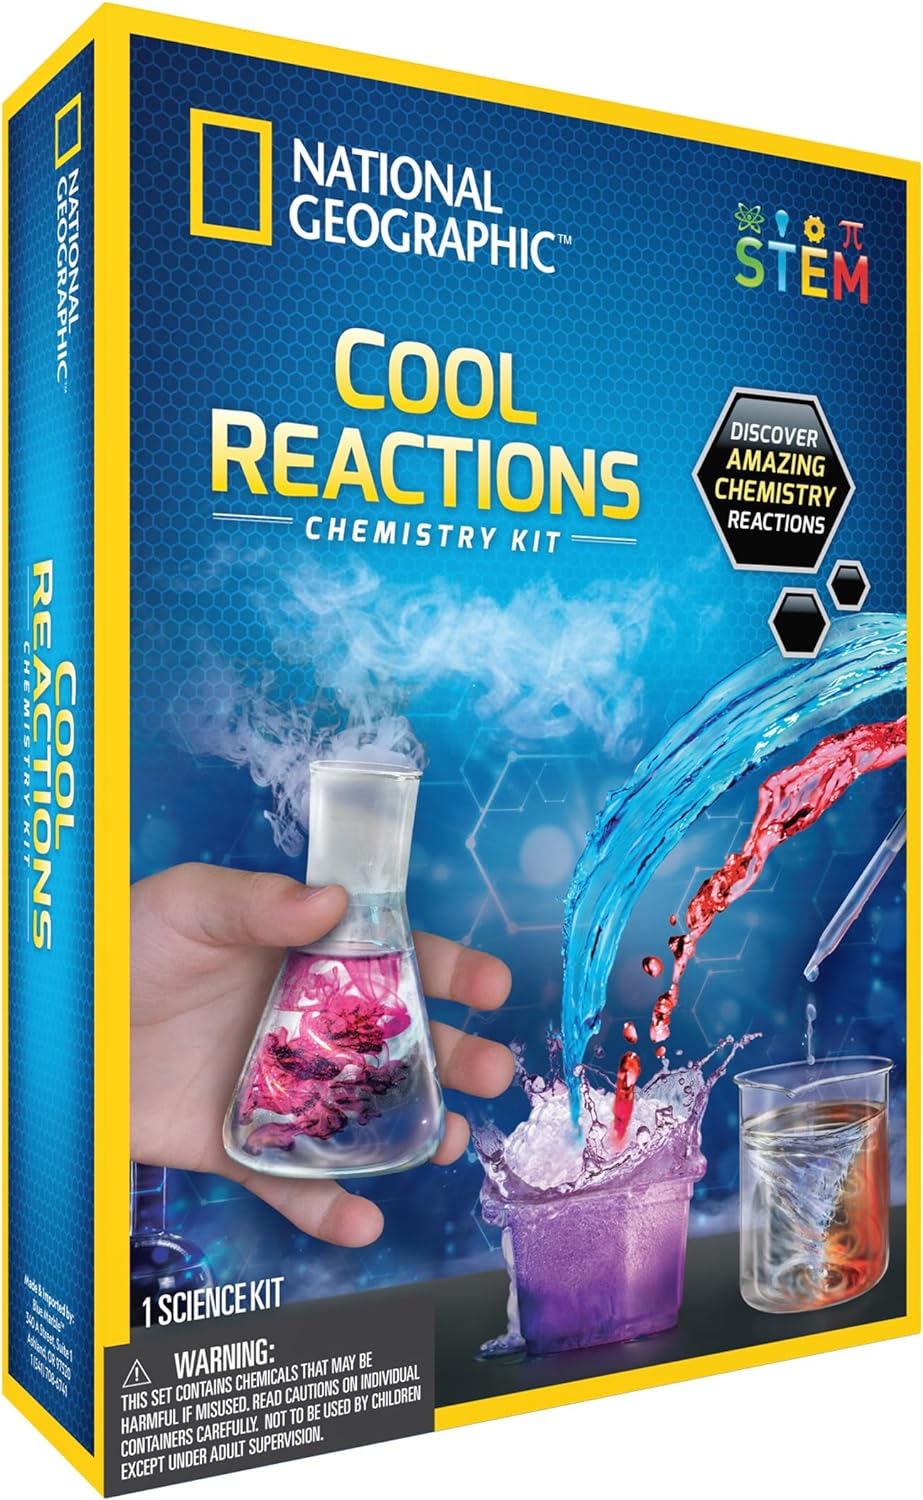 Cool Reactions Chemistry